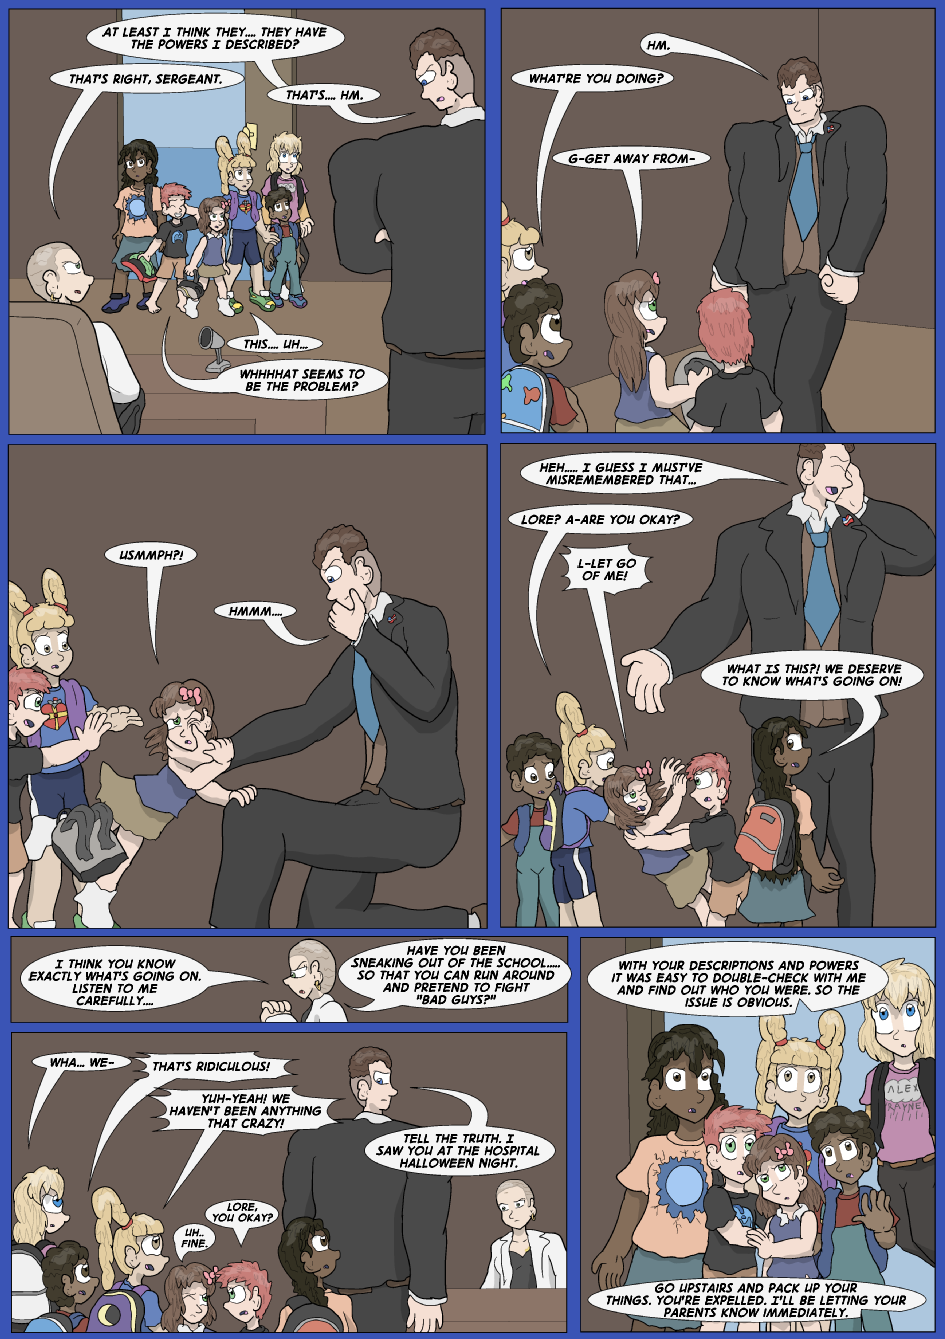 Showing Your Blue Colors- Page 4